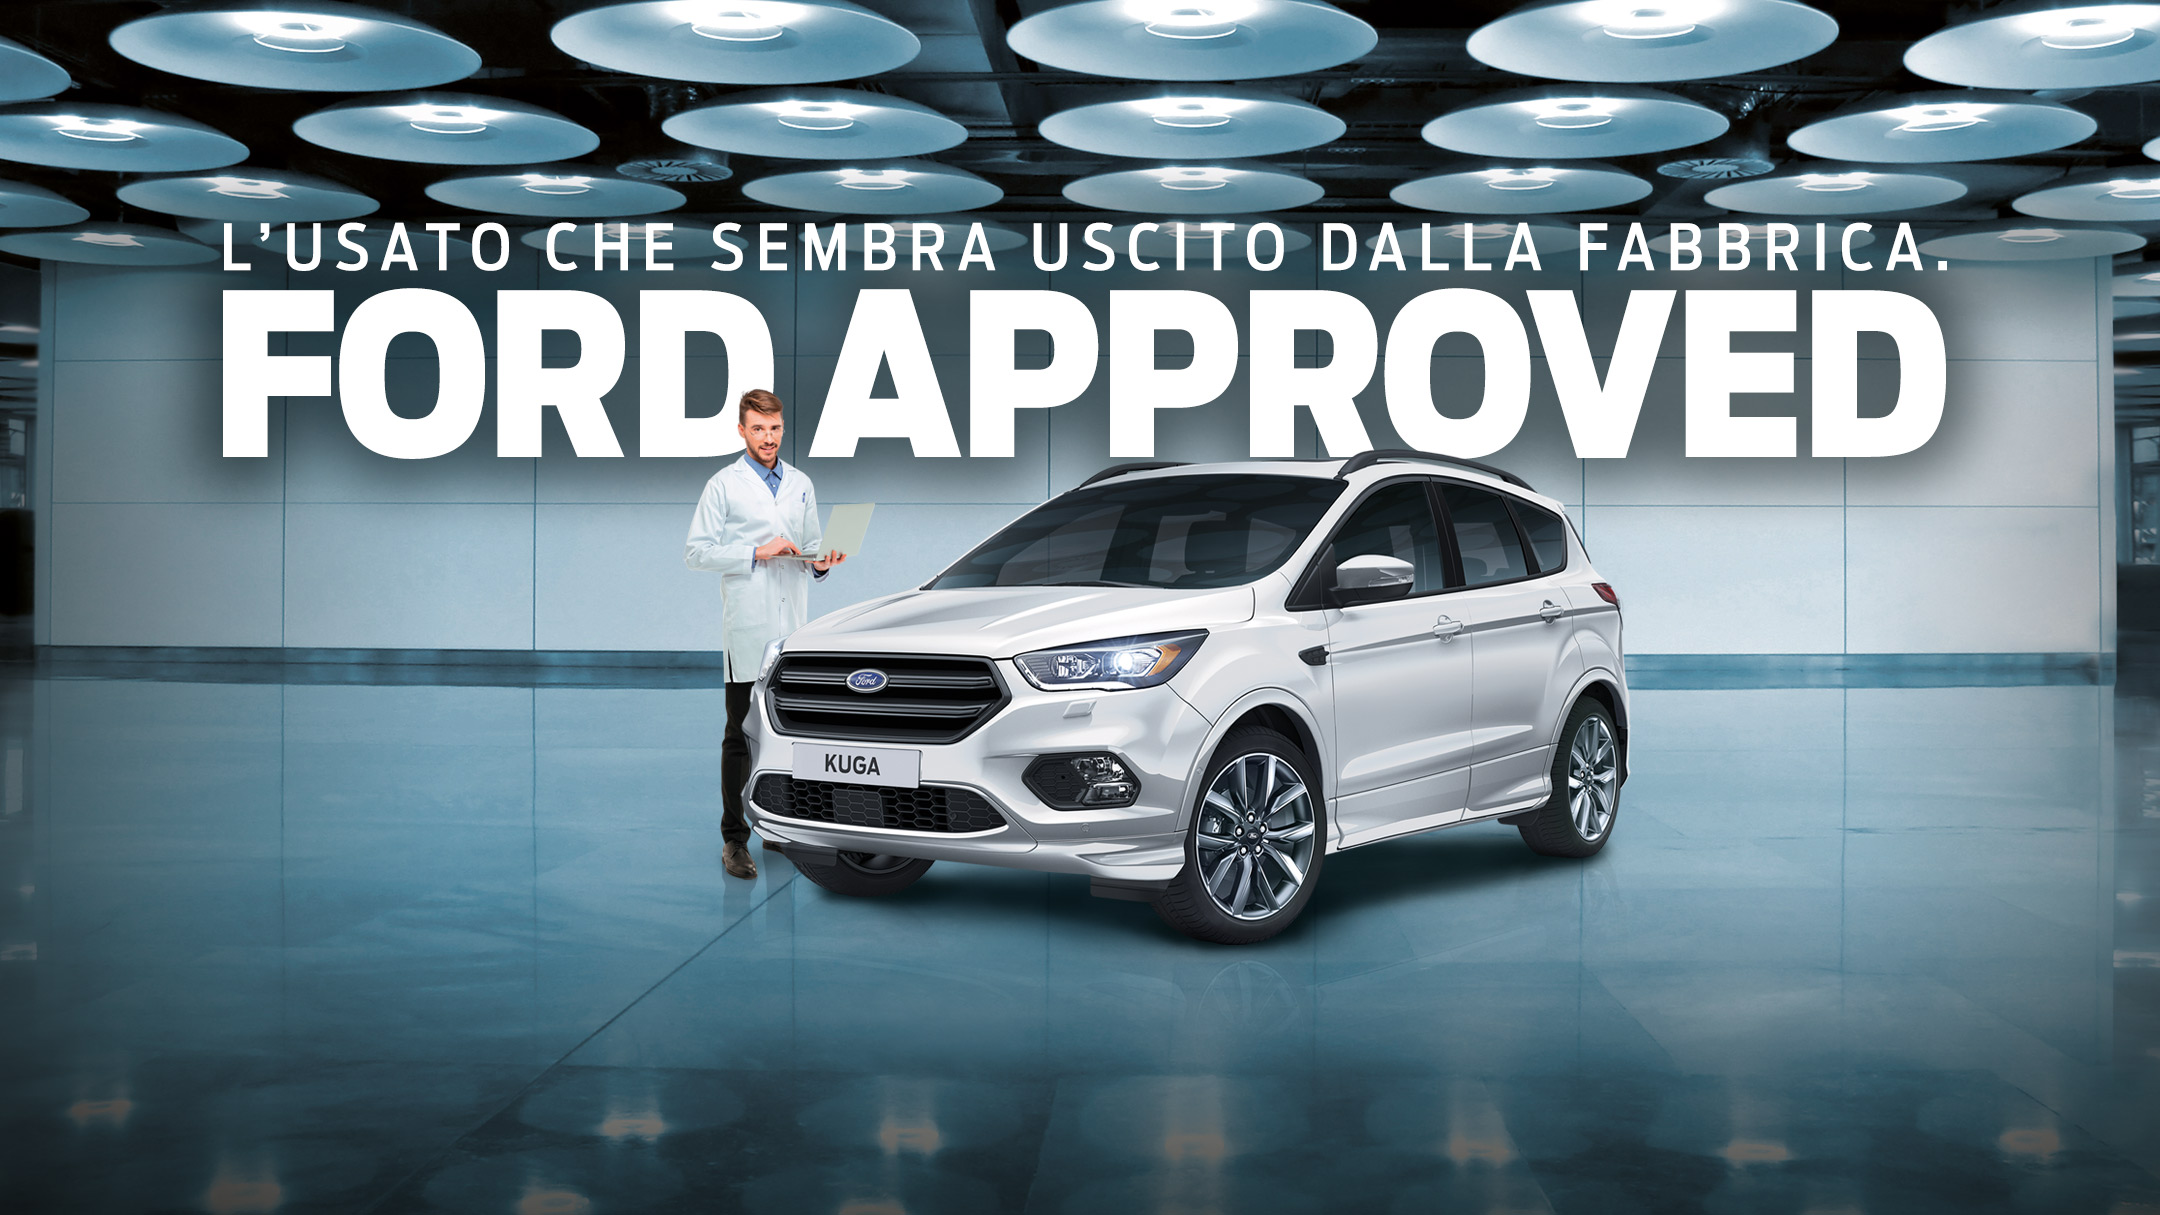 Ford Approved Kuga Monza Milano